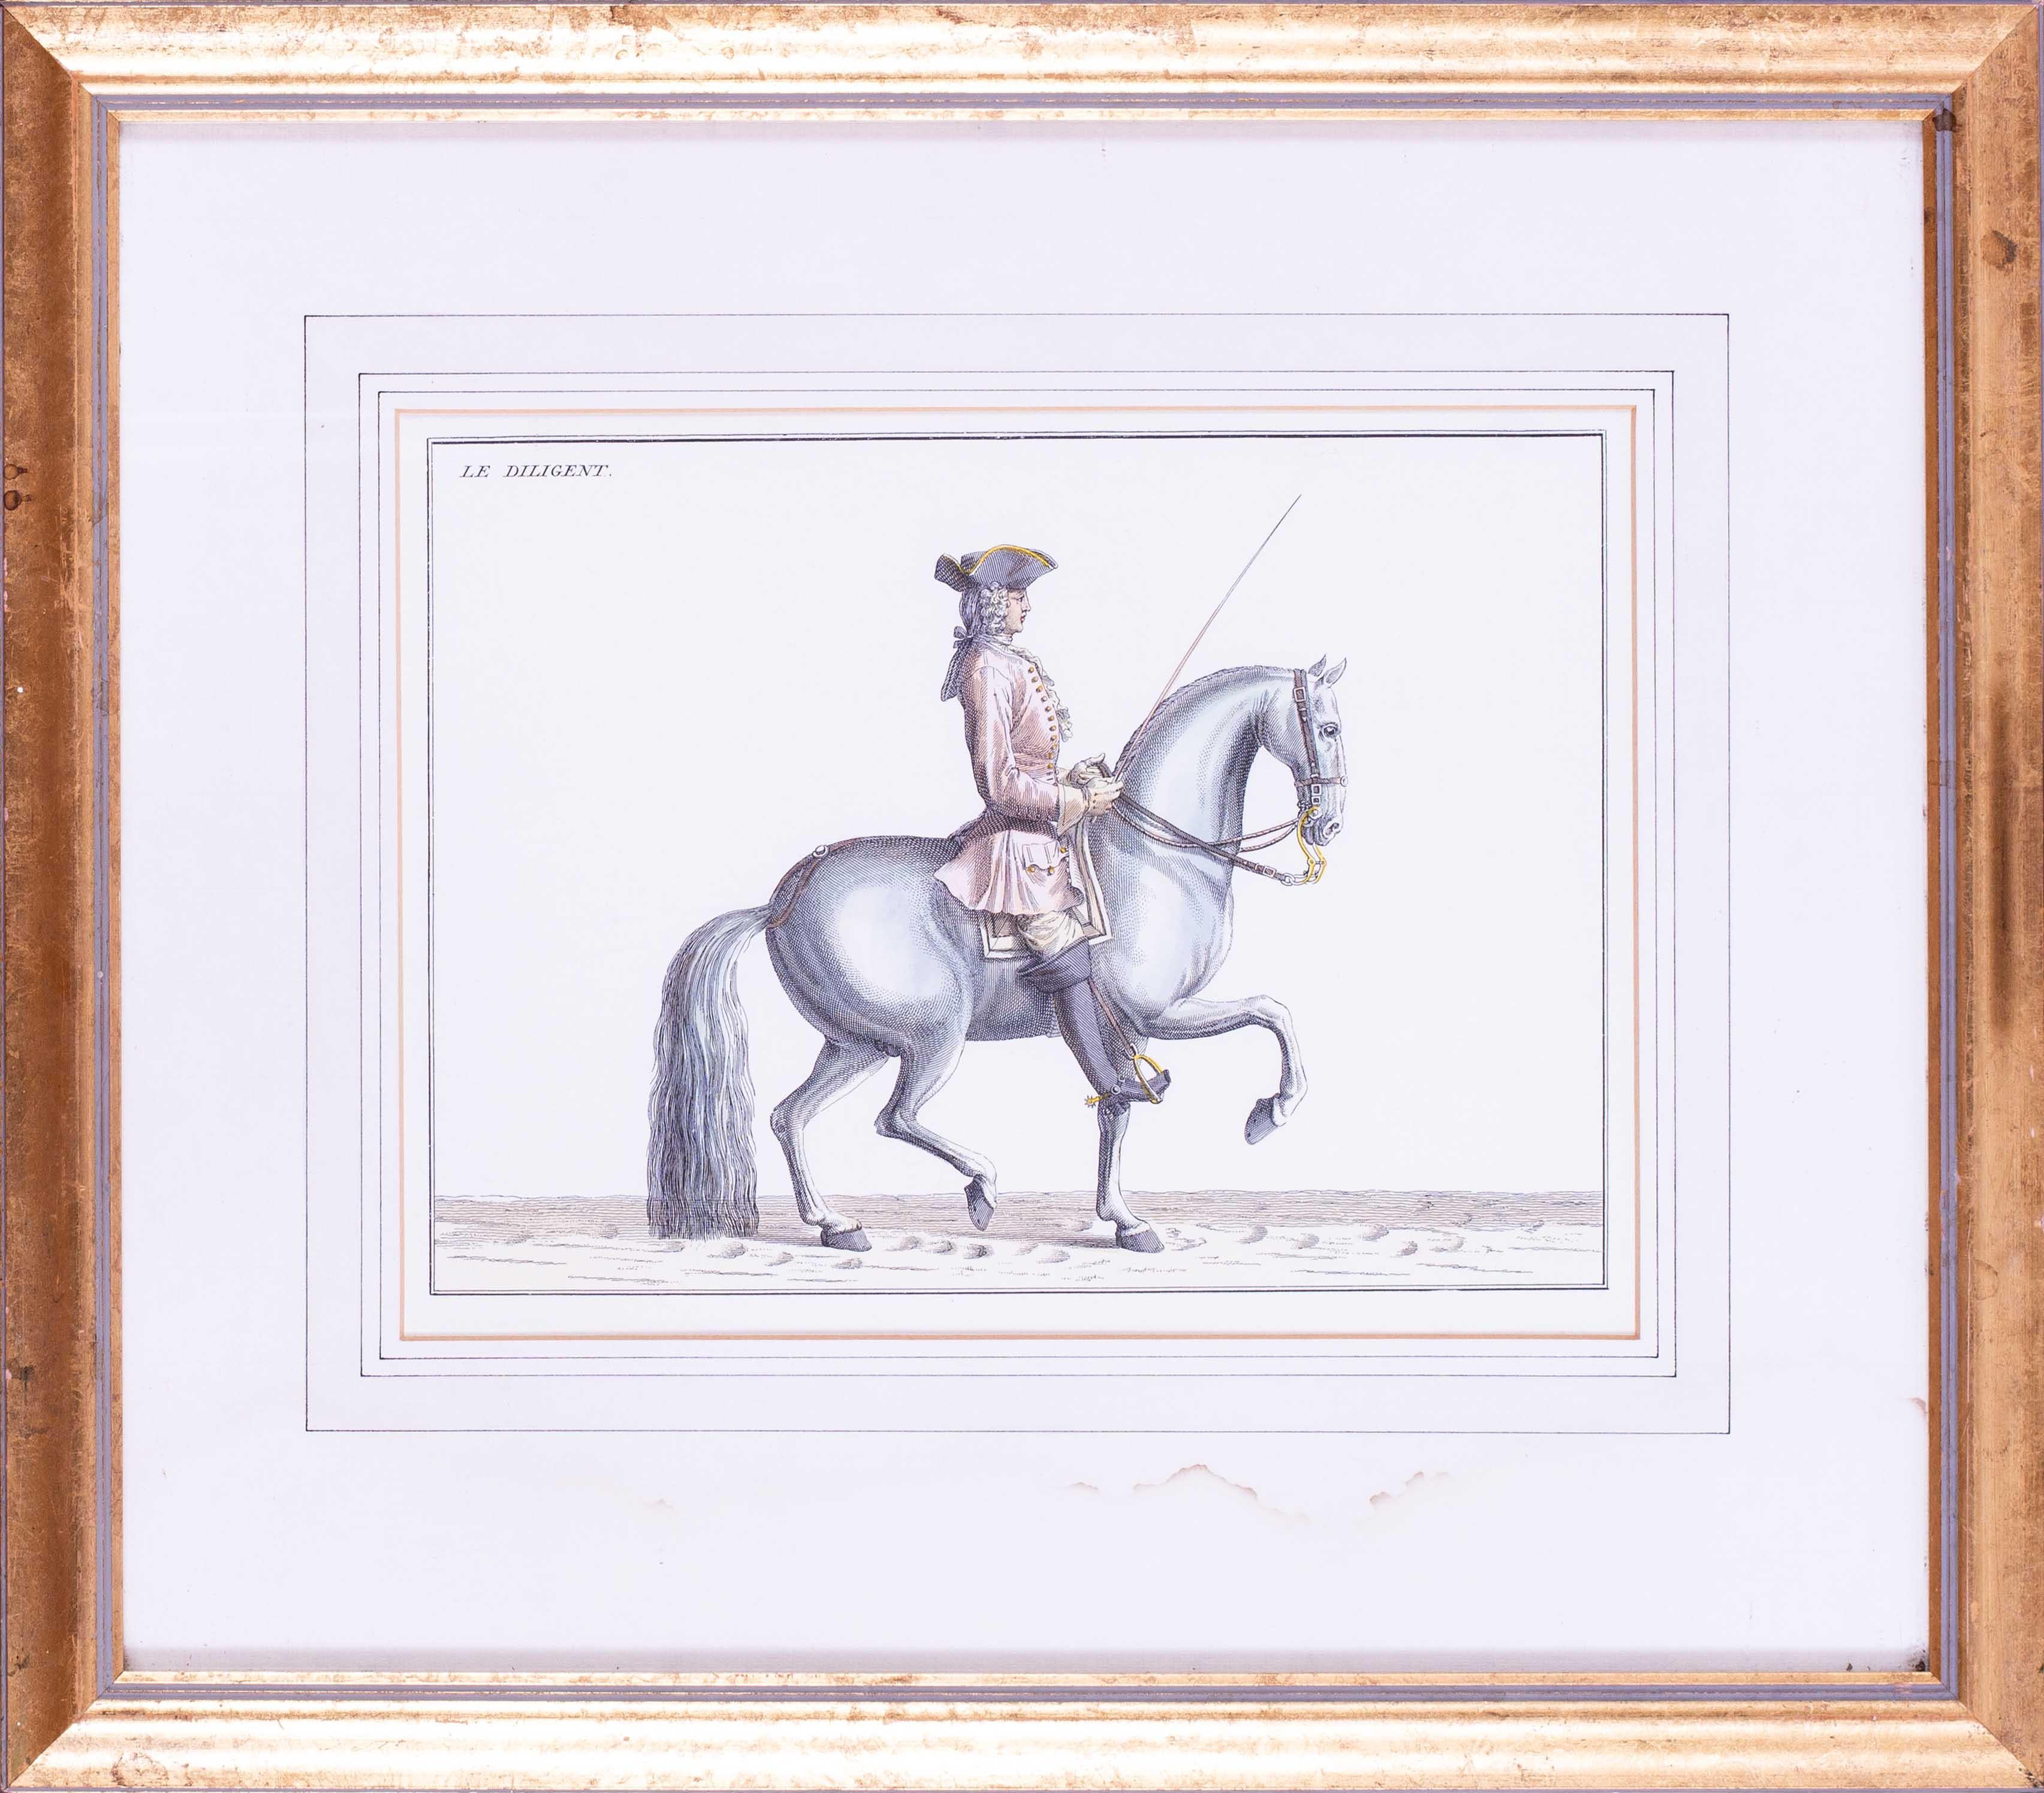 Set of 8, 20th Century prints of horses and French riders after Bernard Picart - Print by Bernard Picart 